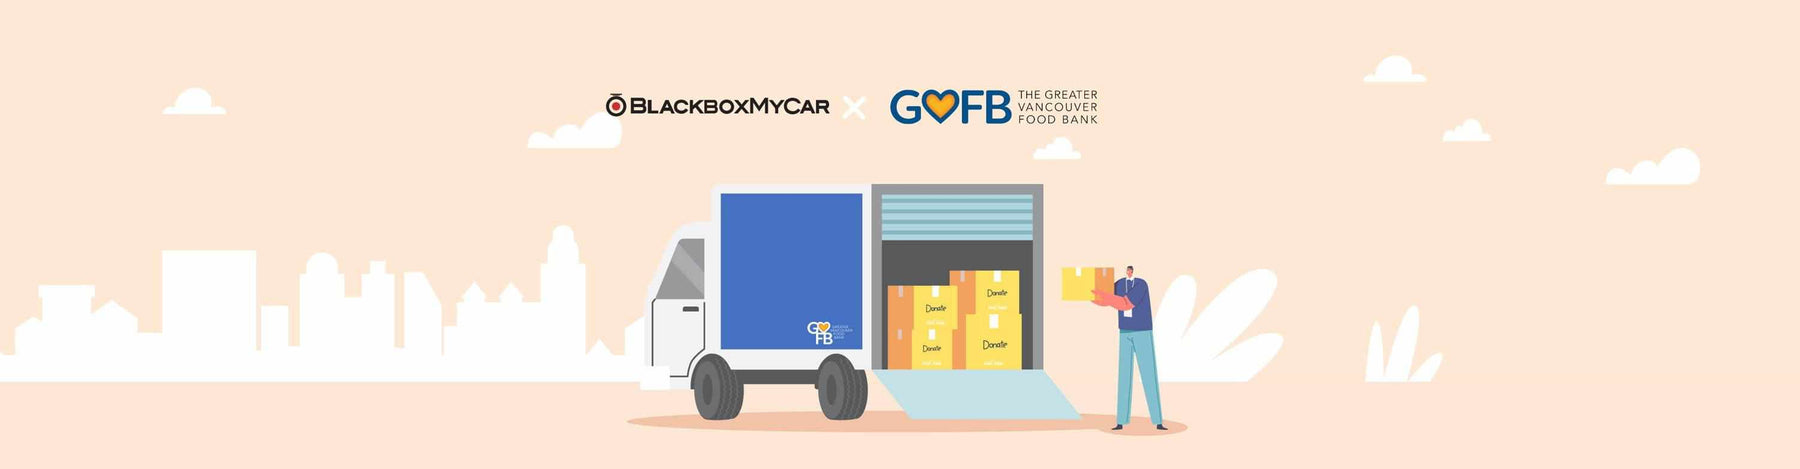 BlackboxMyCar | Helping Out In the Community - Greater Vancouver Food Bank -  - BlackboxMyCar Canada